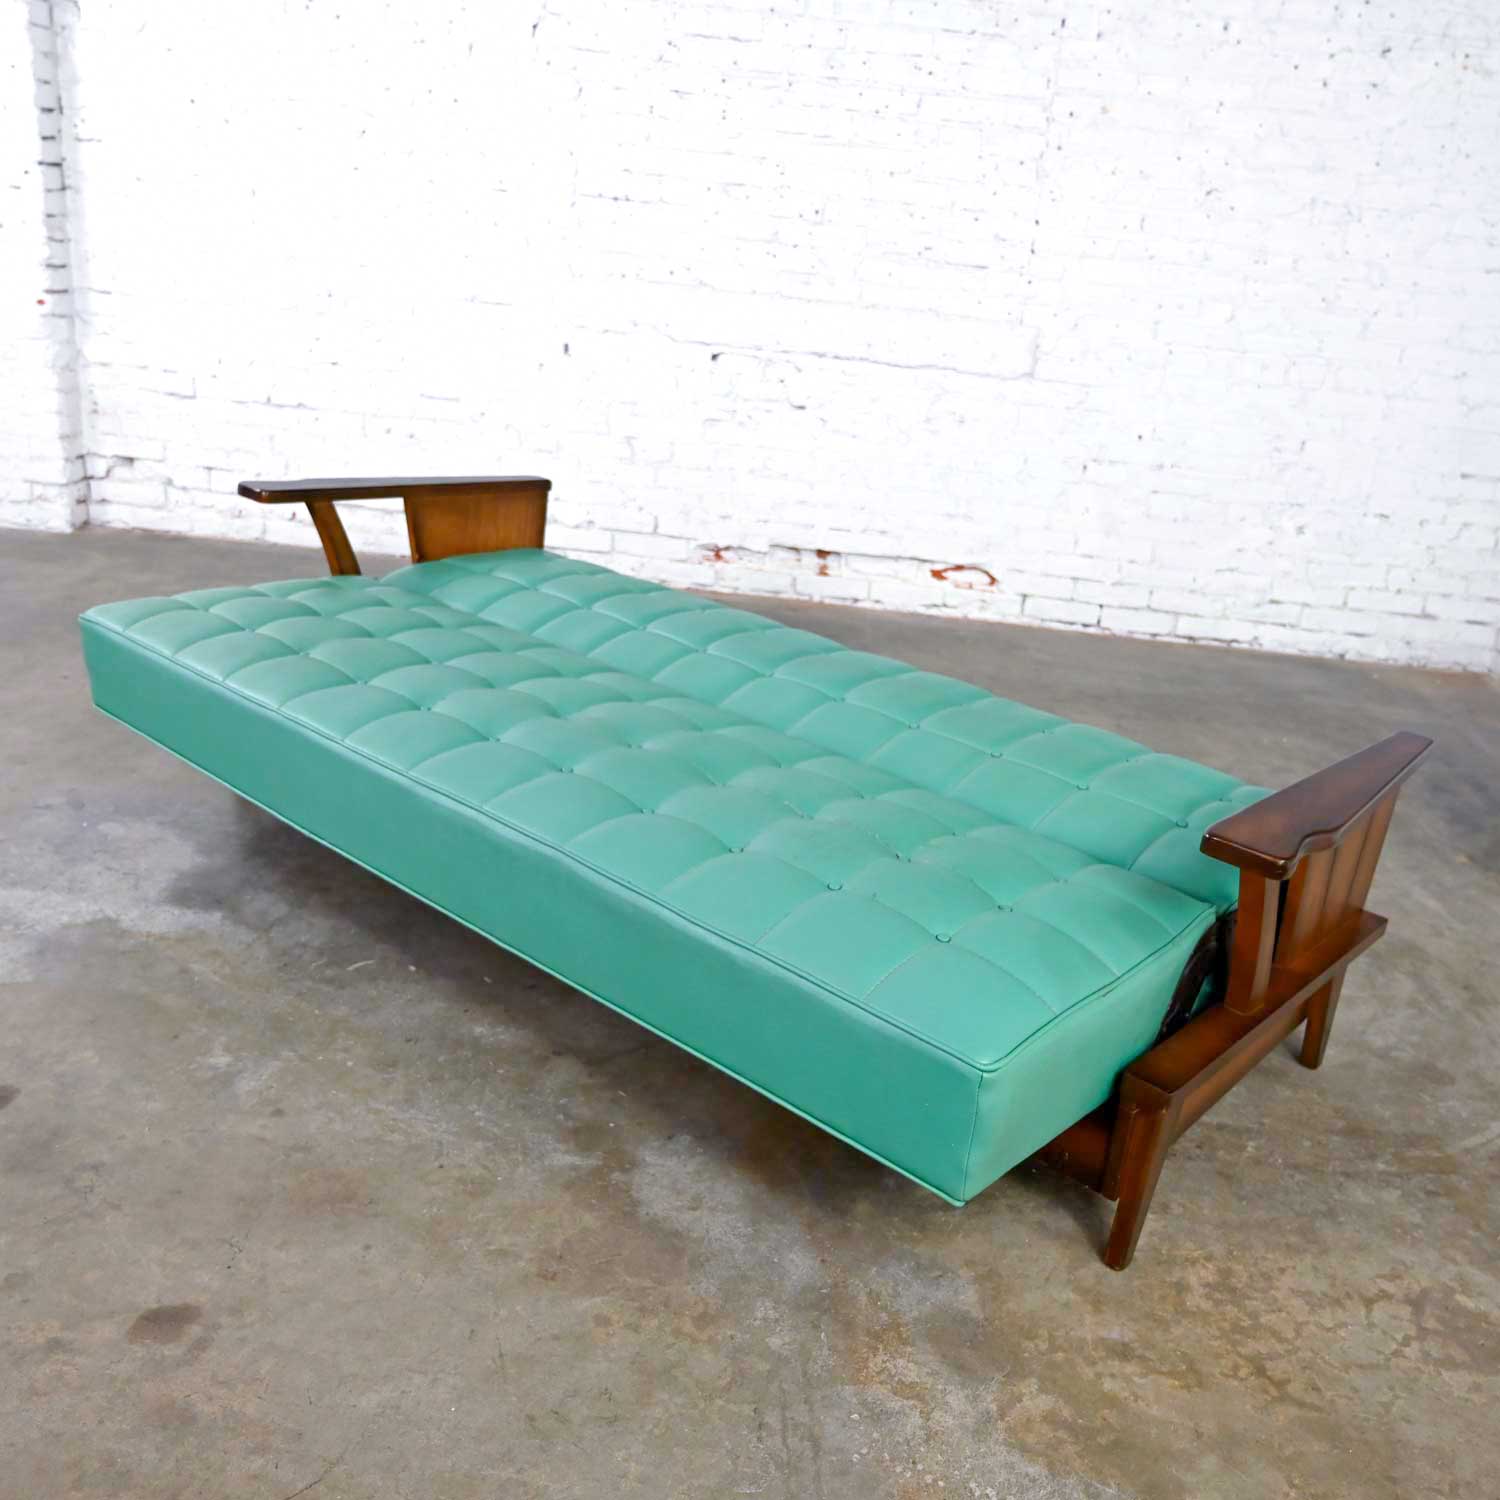 A Brandt Ranch Oak Style Turquoise Vinyl Convertible Sofa Daybed by Economy Furniture